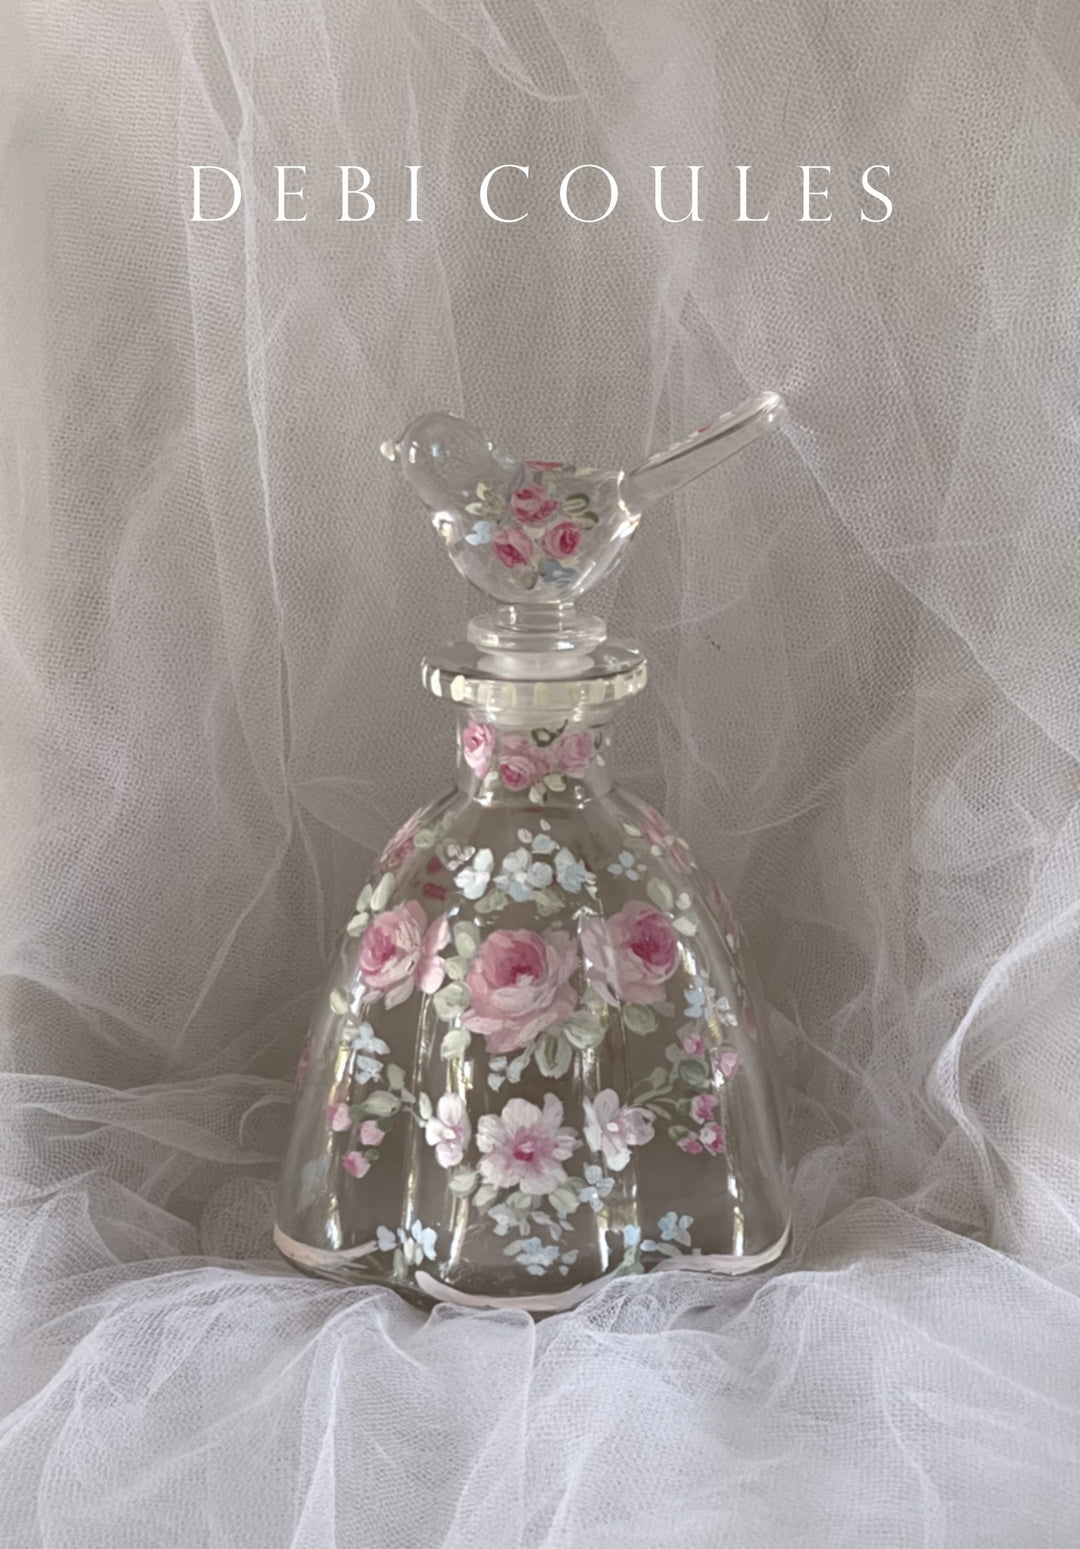 Charming hand painted glass perfume bottle with French roses, shades of pink and white. blue and white wildflowers mingle, Scalloped edges, bird stopper also has roses. Original Vintage Shabby Chic look by Debi Coules